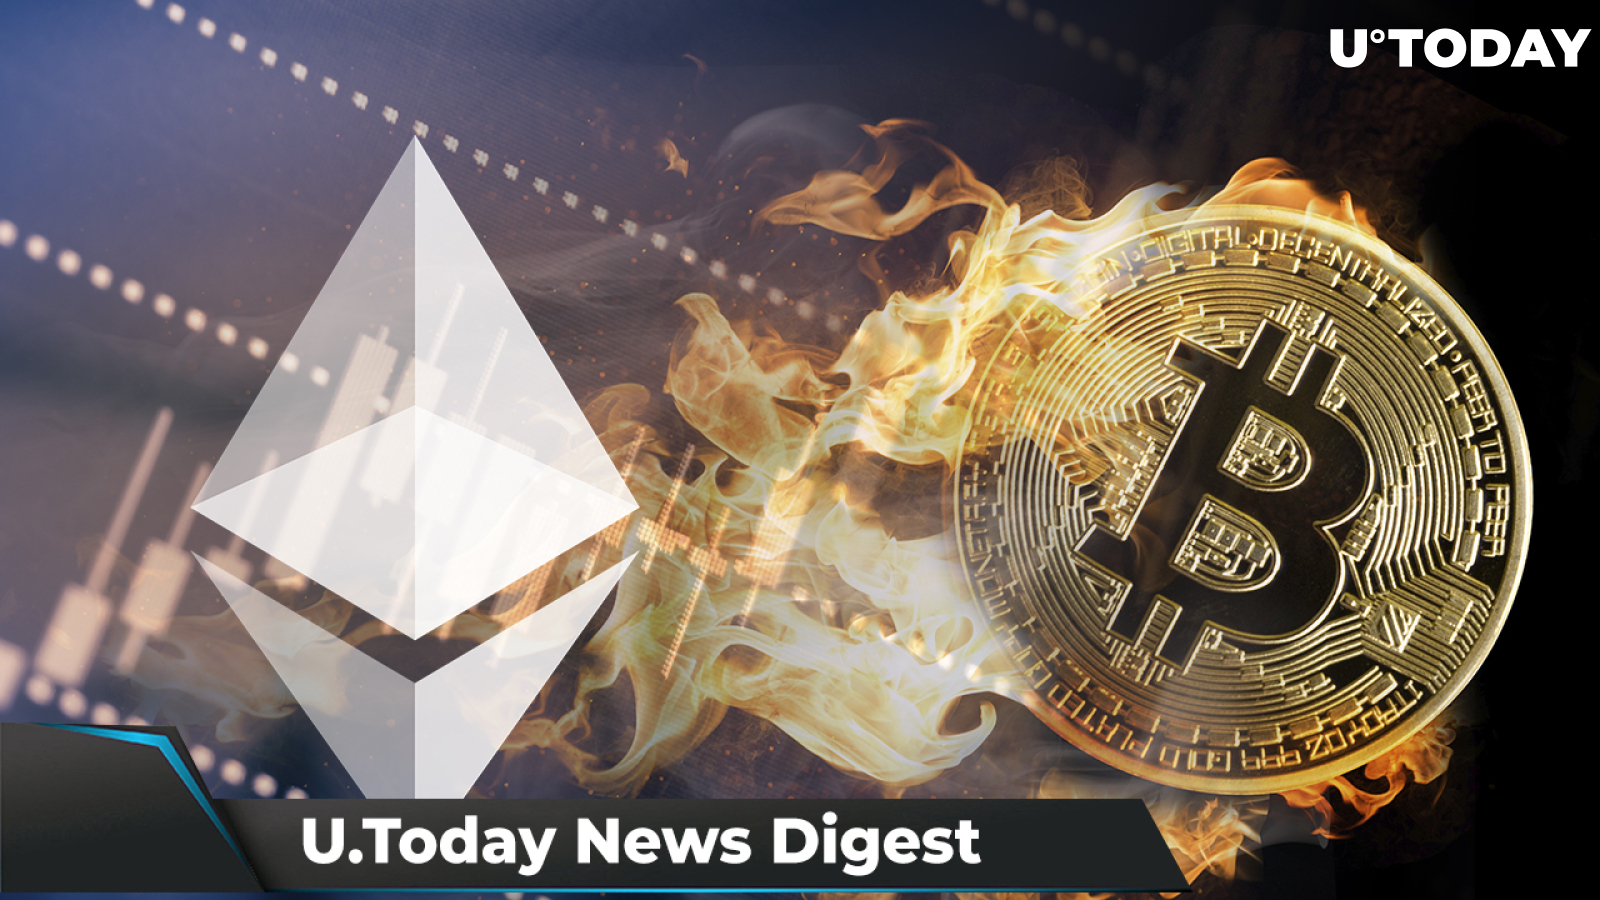 BTC Difficulty Hits New ATH, ETH Price Likely to Turn Positive Soon, SHIB Price Hints at Upcoming Move: Crypto News Digest by U.Today